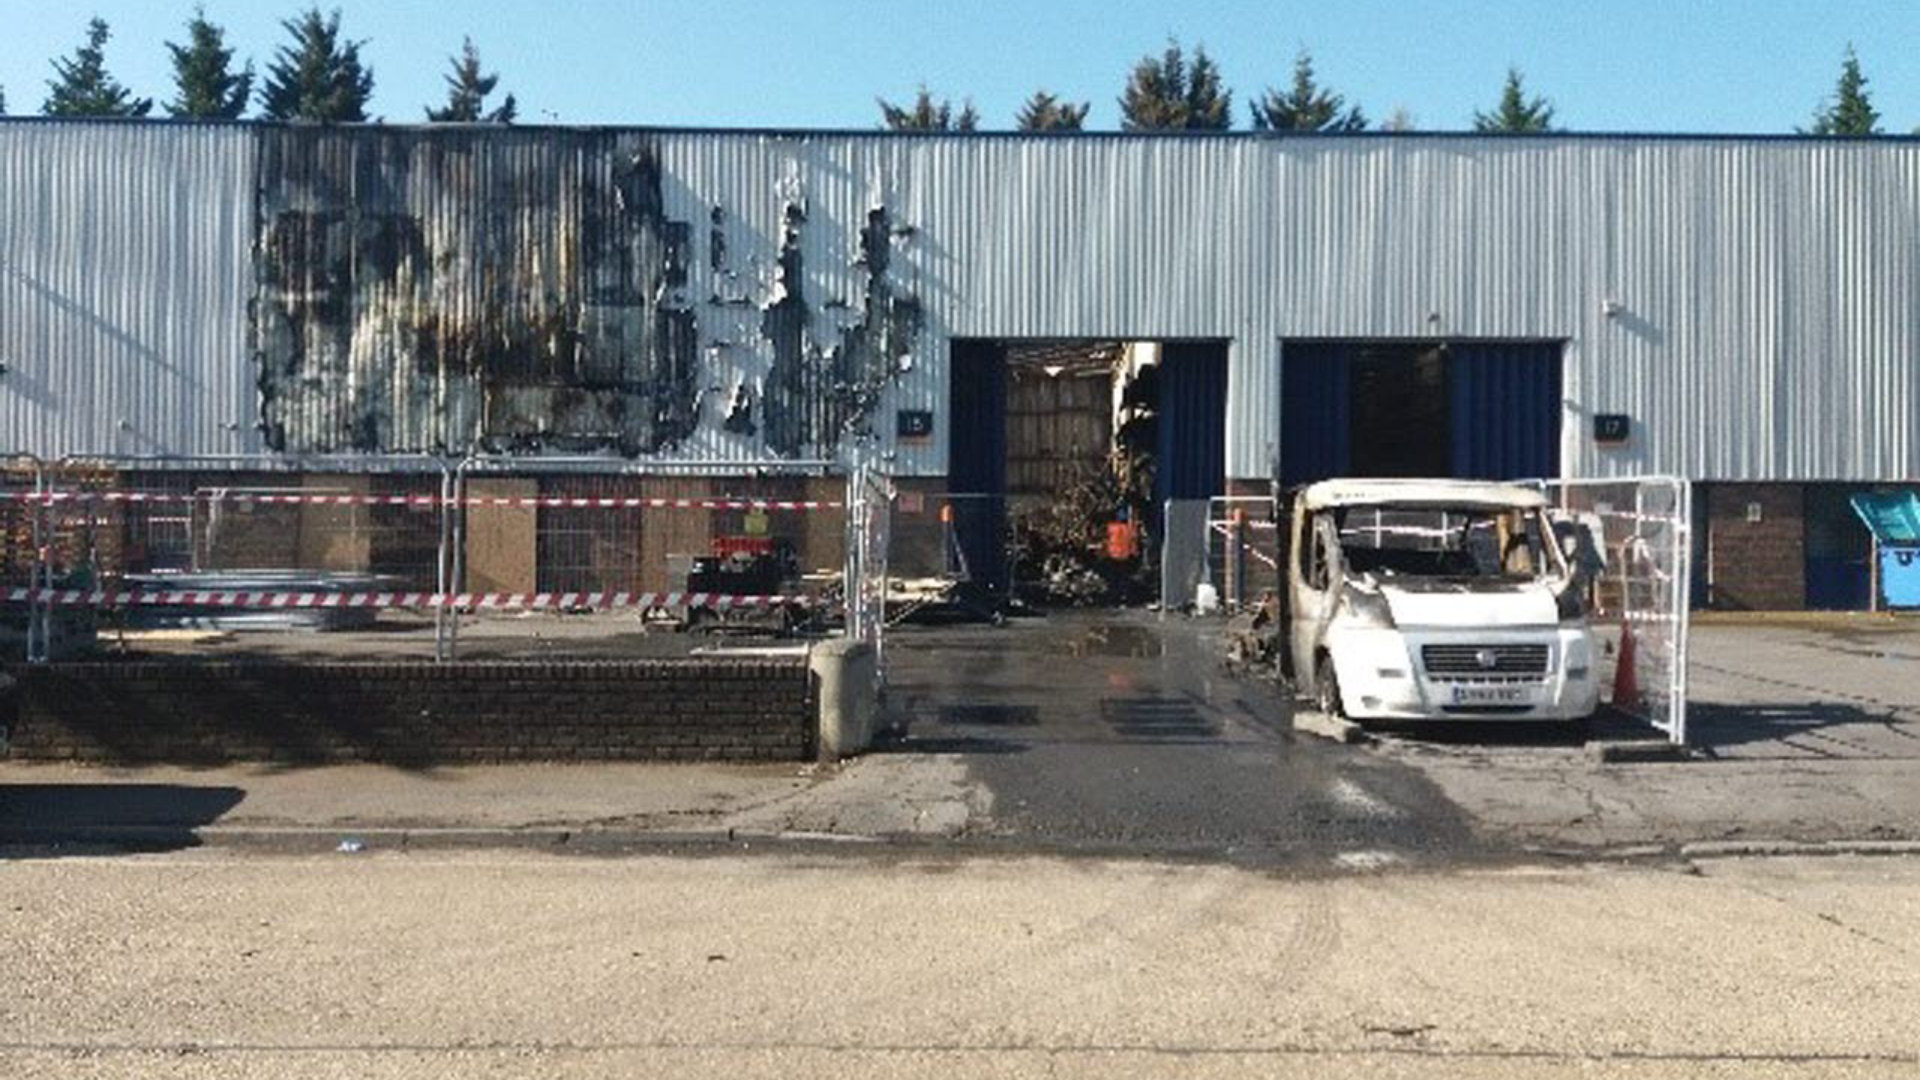 Industrial unit following fire damage contamination following building fire